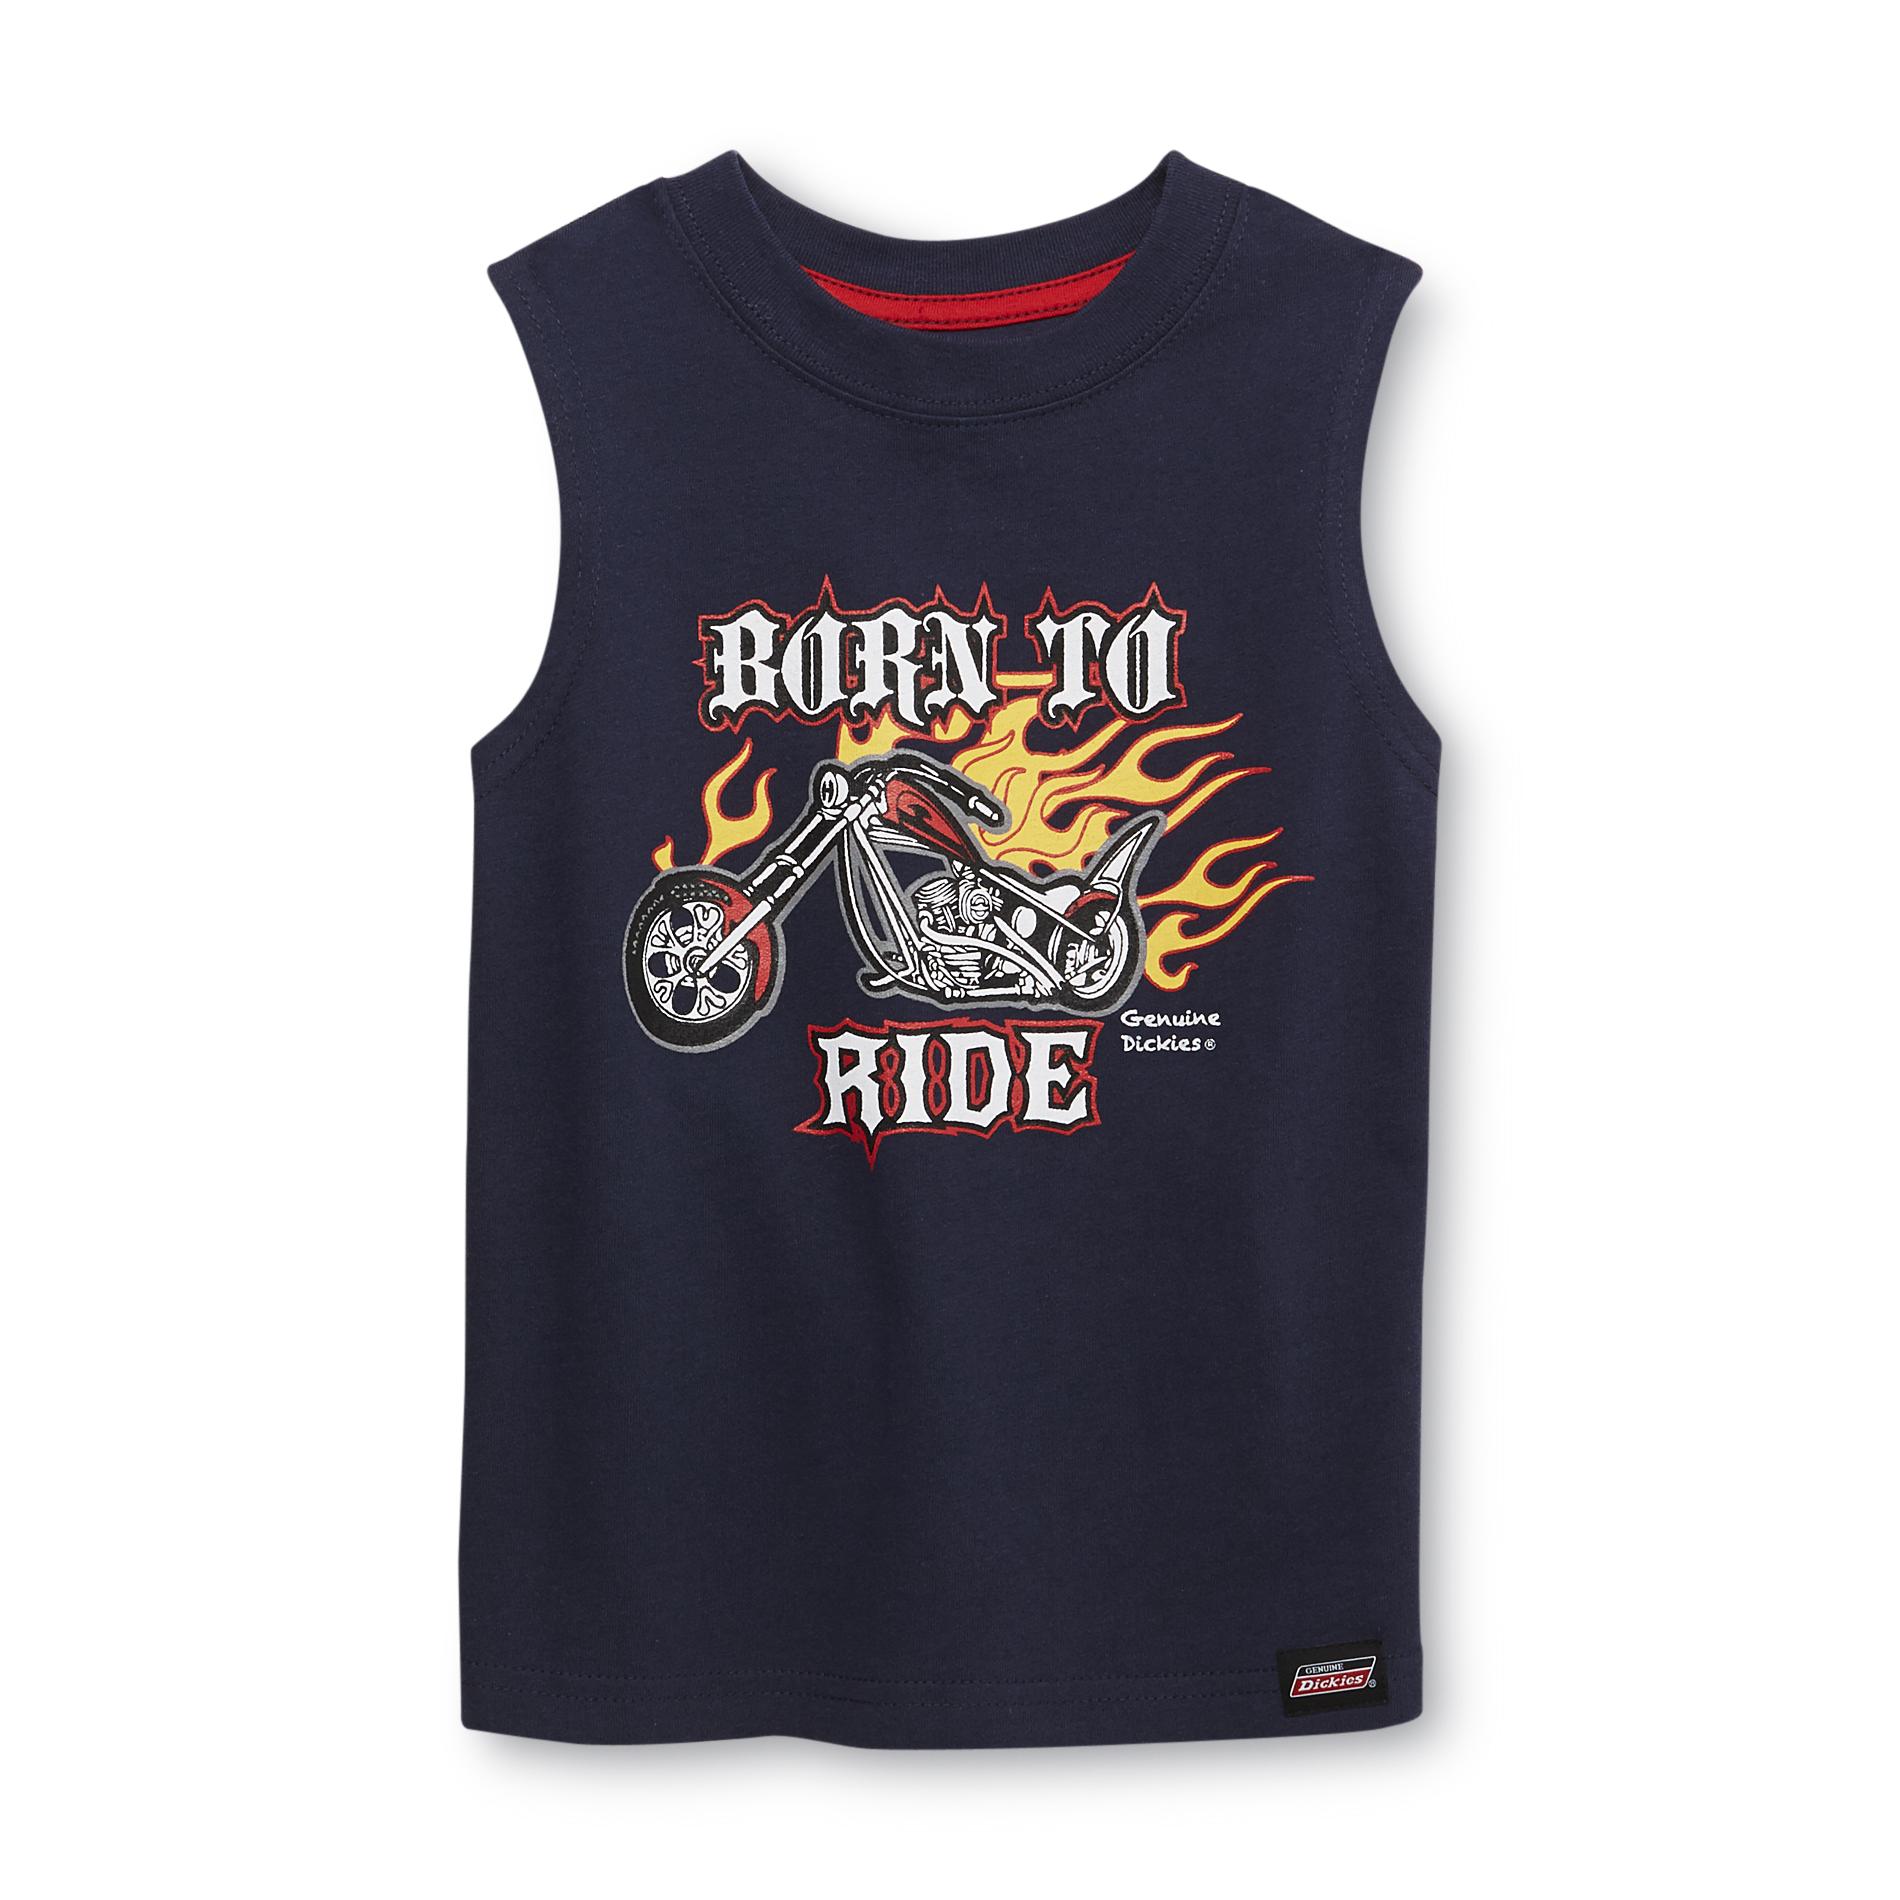 Dickies Infant & Toddler Boy's Graphic Muscle Shirt - Born To Ride